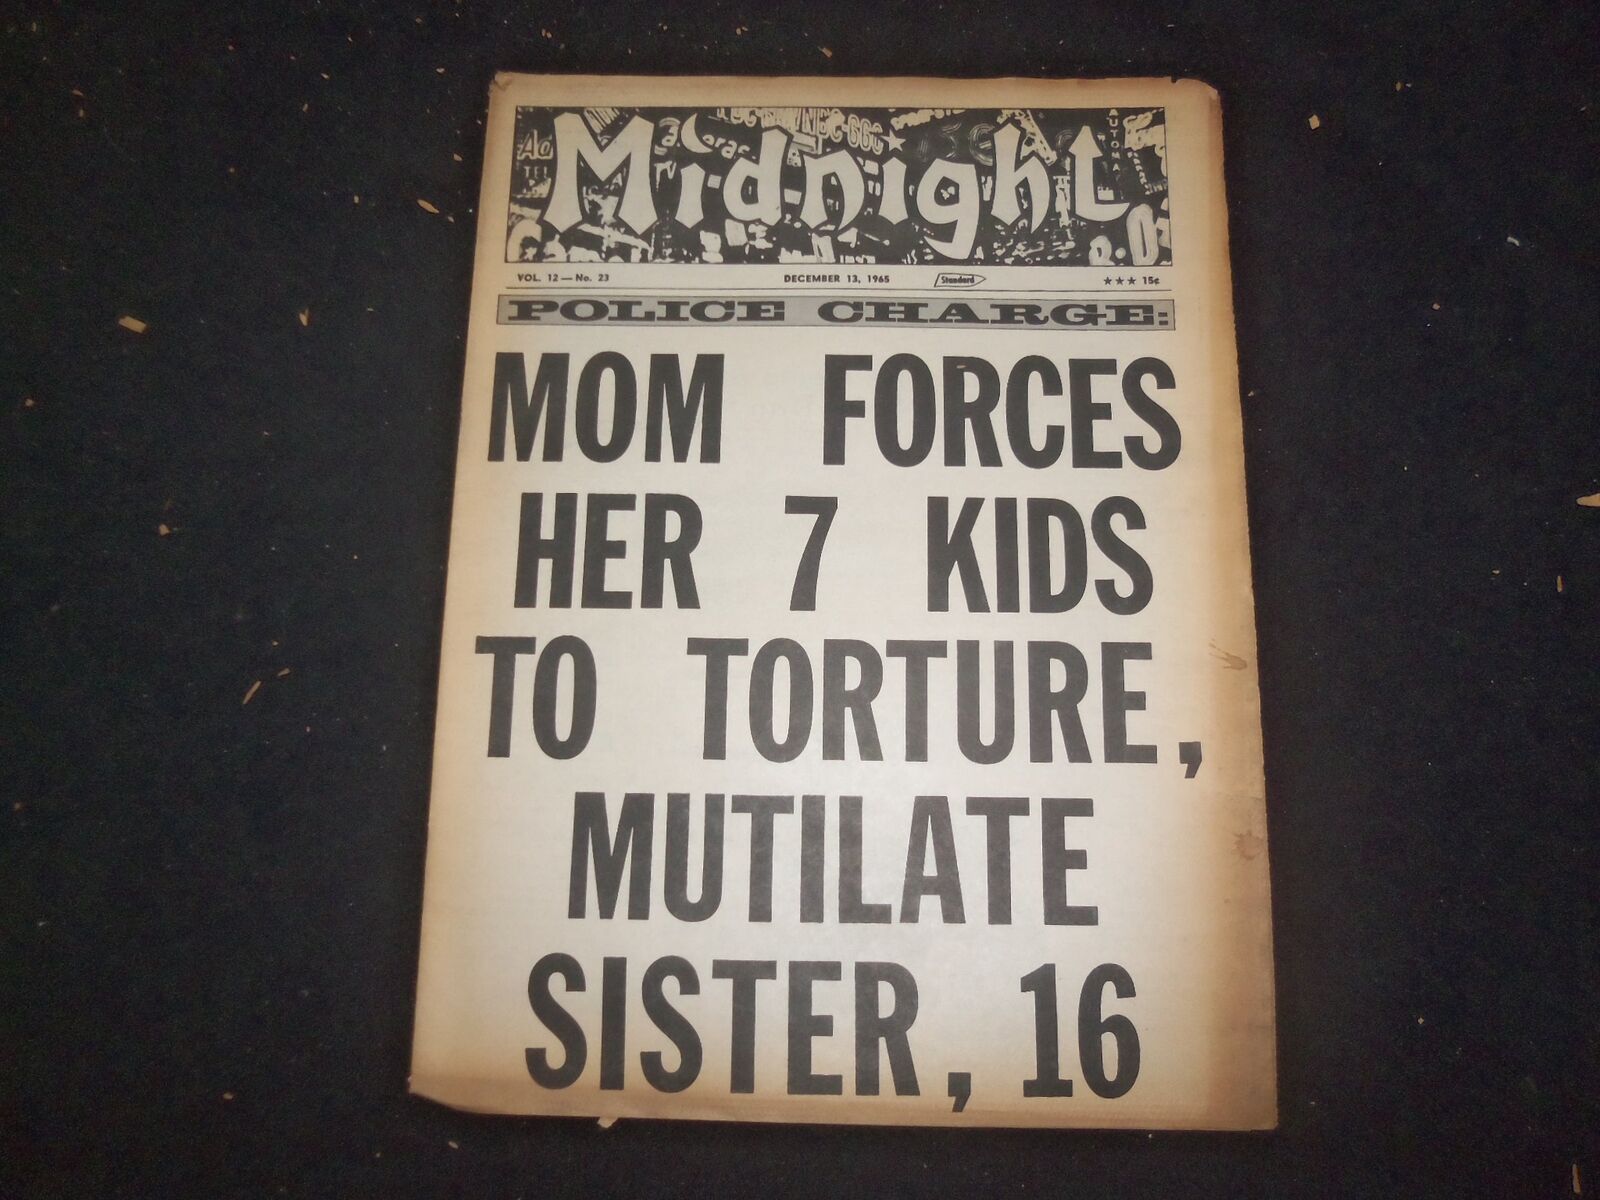 1965 DEC 13 MIDNIGHT NEWSPAPER - MOM FORCES KIDS TO TORTURE, MUTILATE - NP 7357